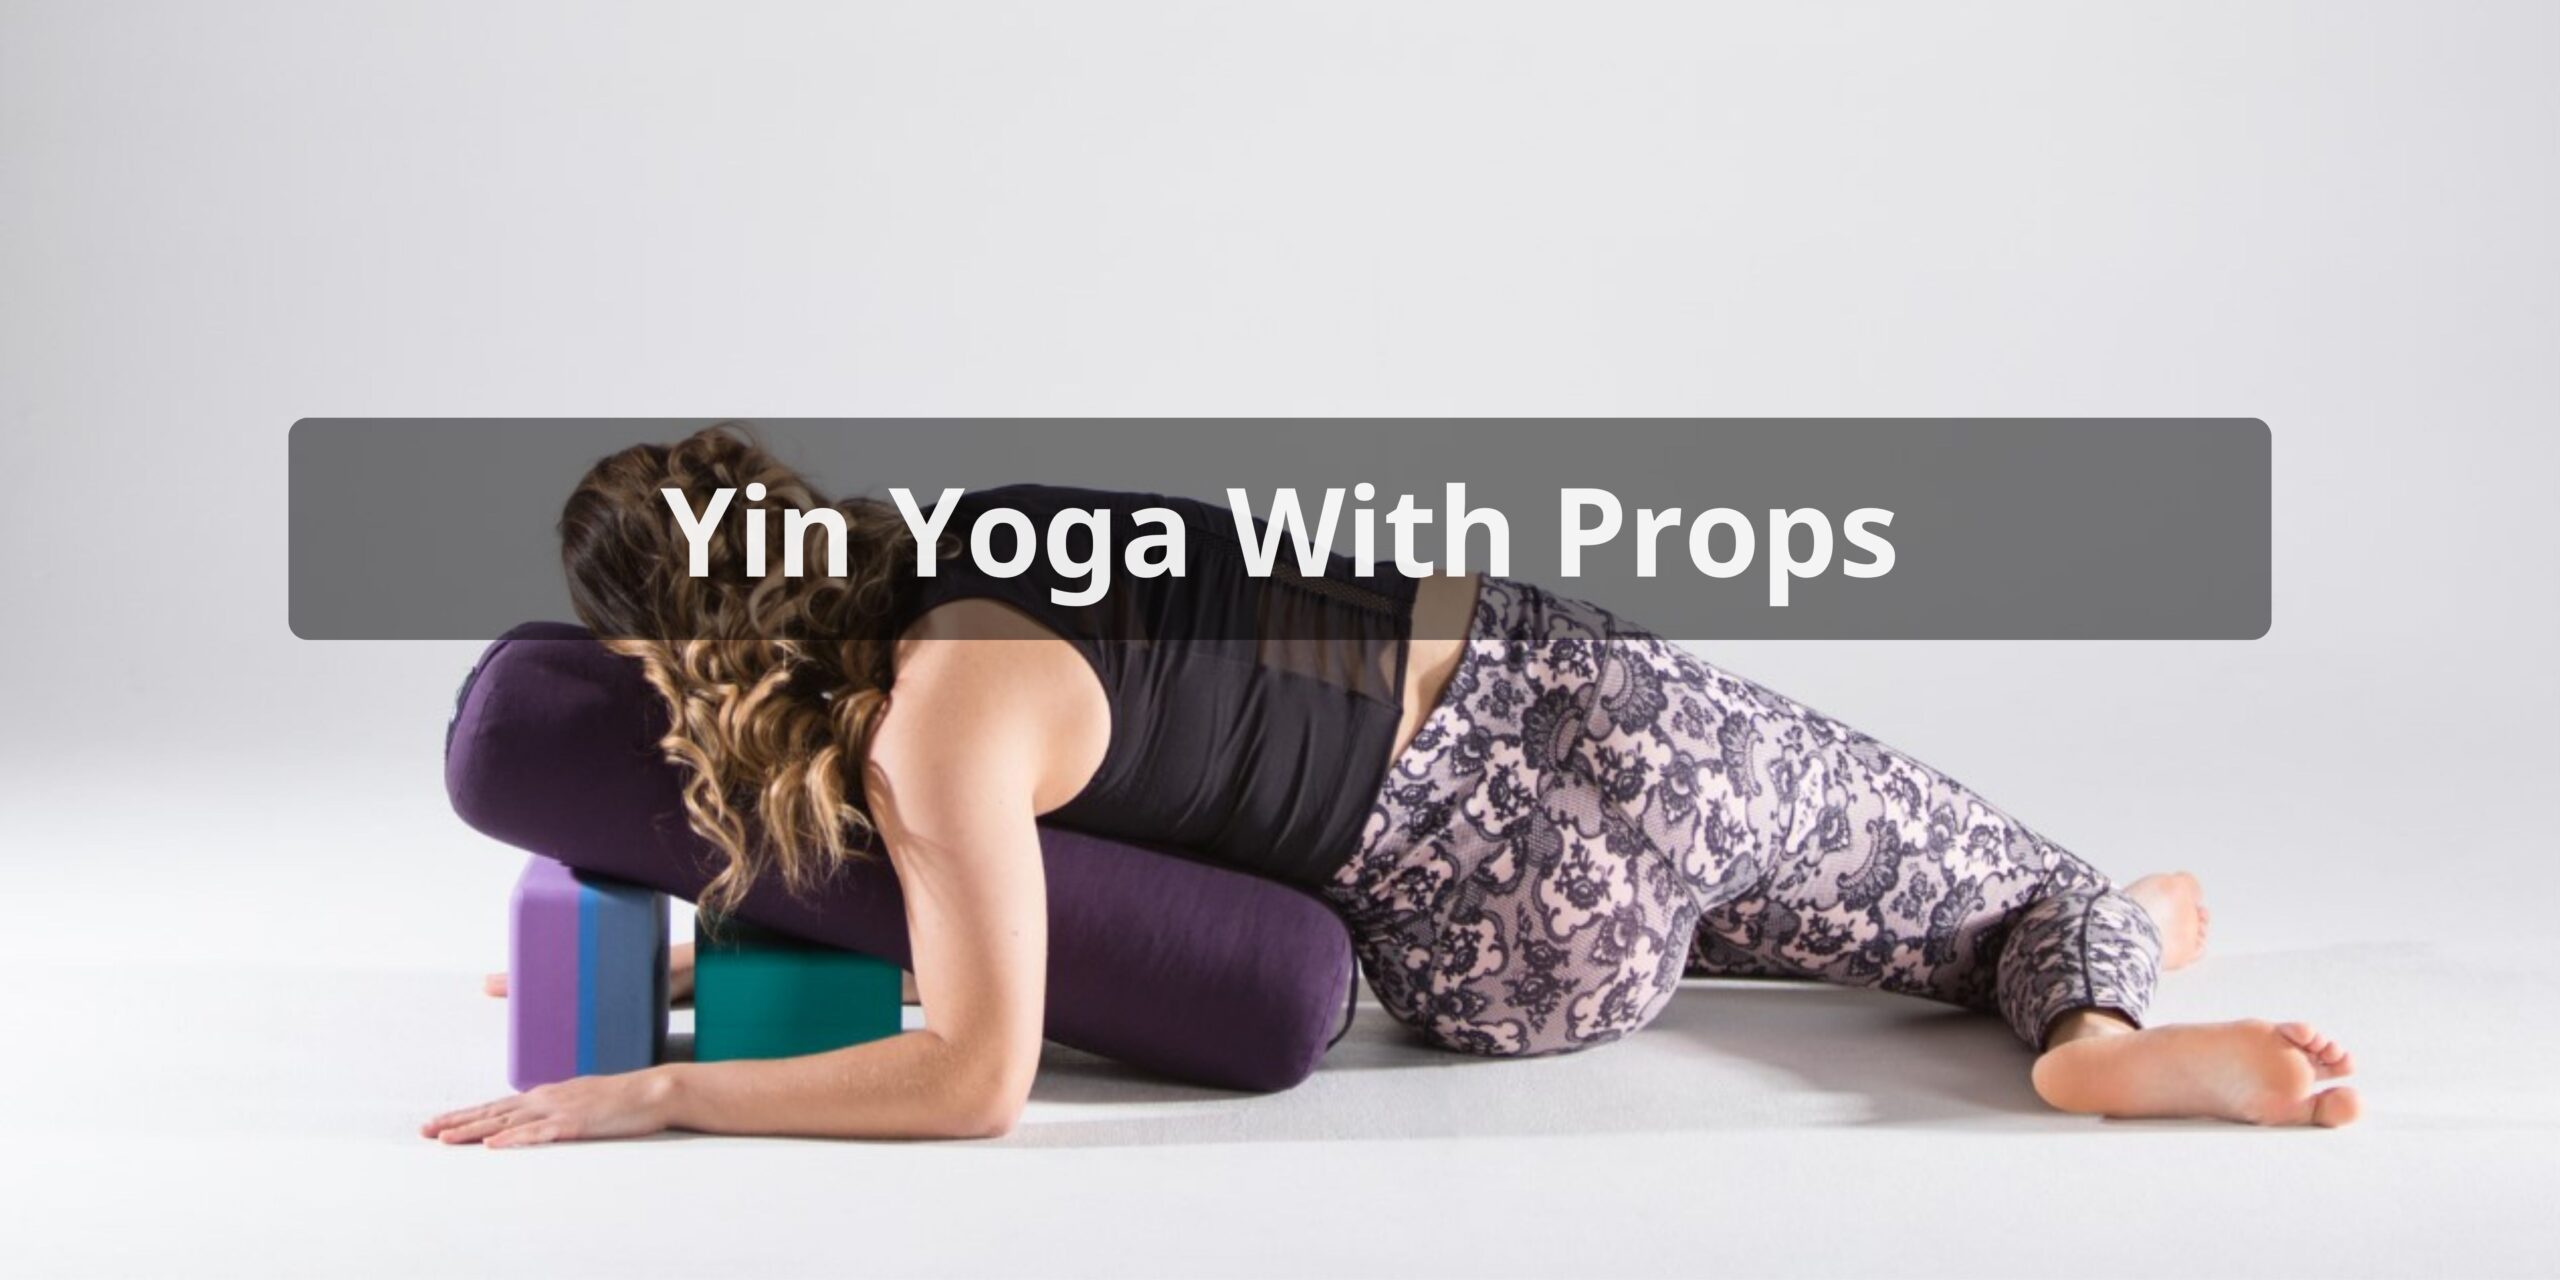 Yin Yoga With Props